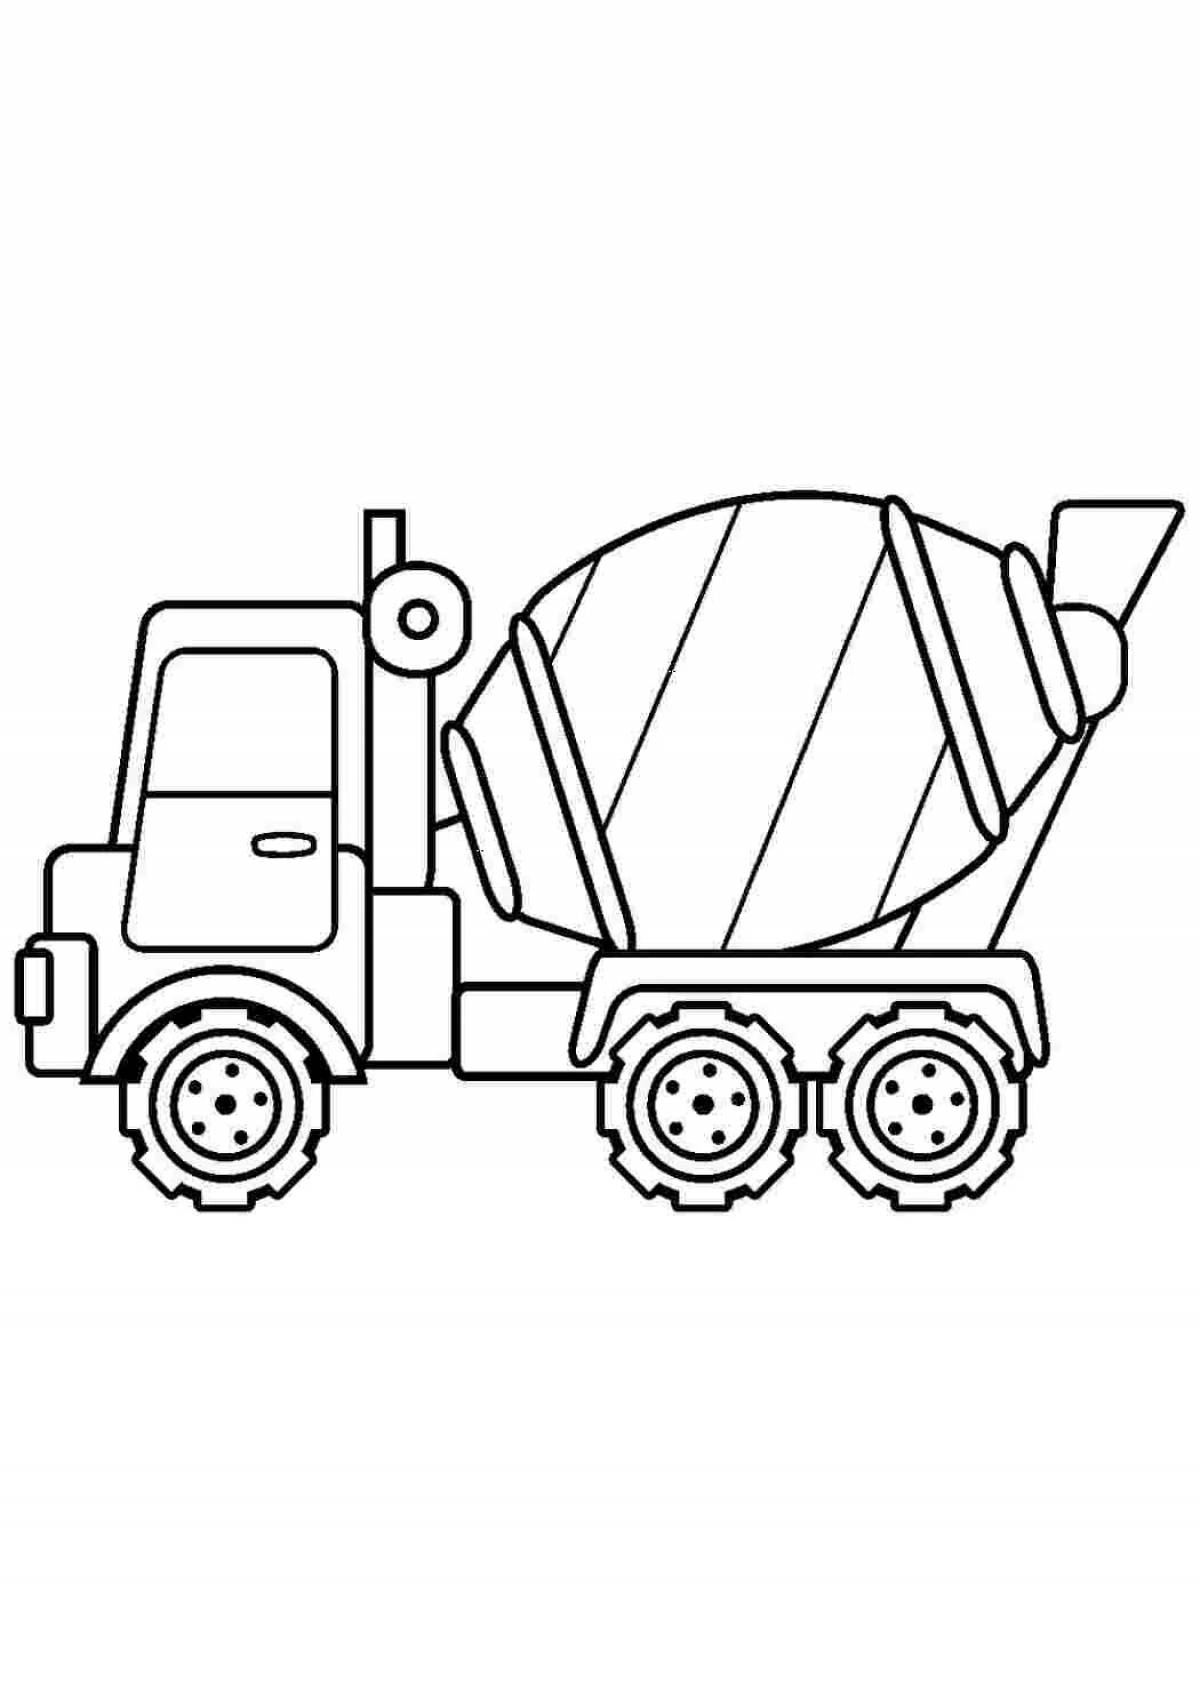 Awesome construction machinery coloring page